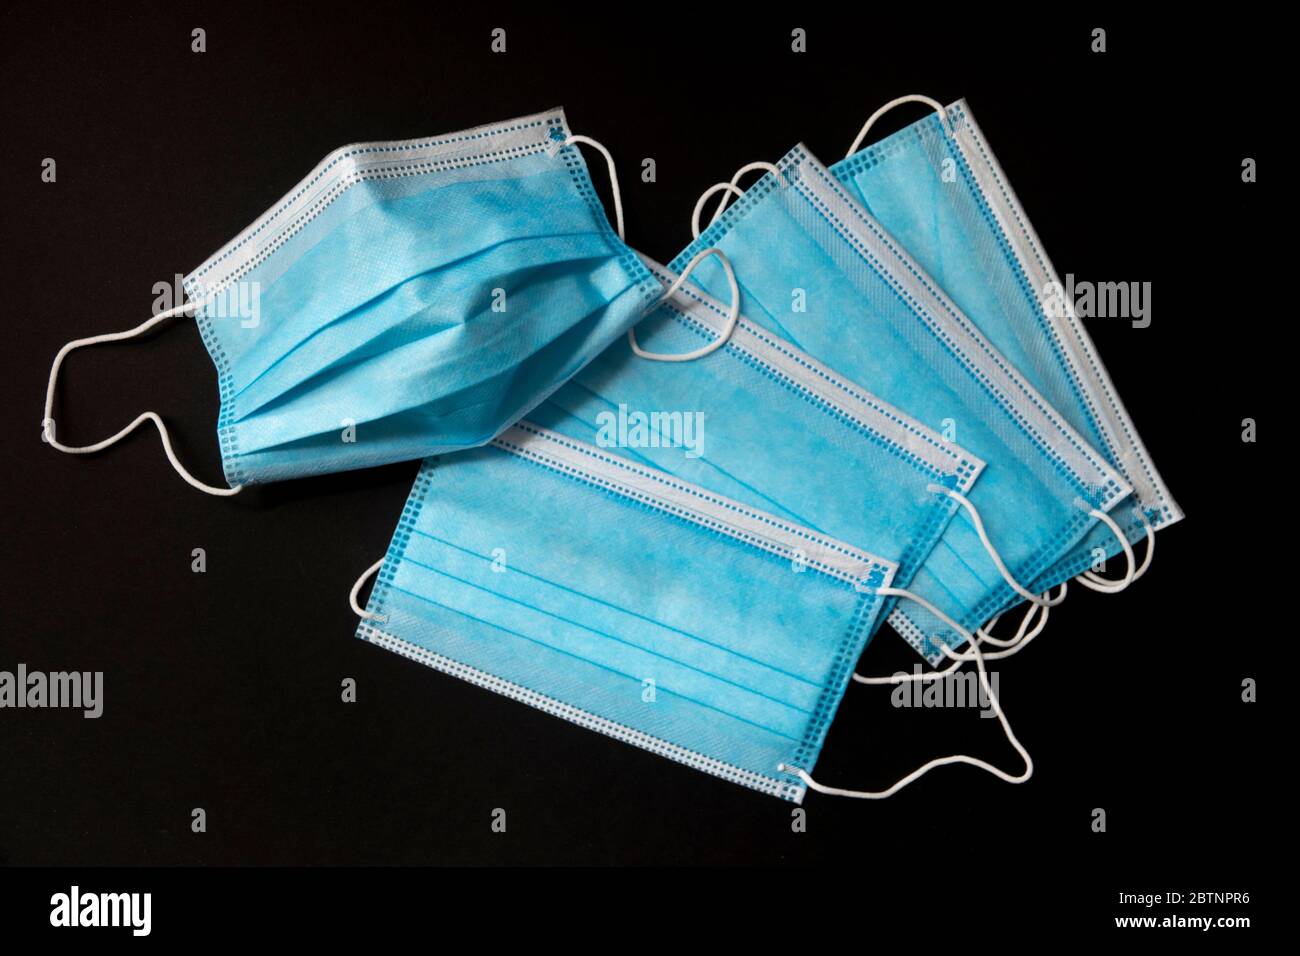 Medical disposable face masks made for single use to cover mouth and nose Stock Photo